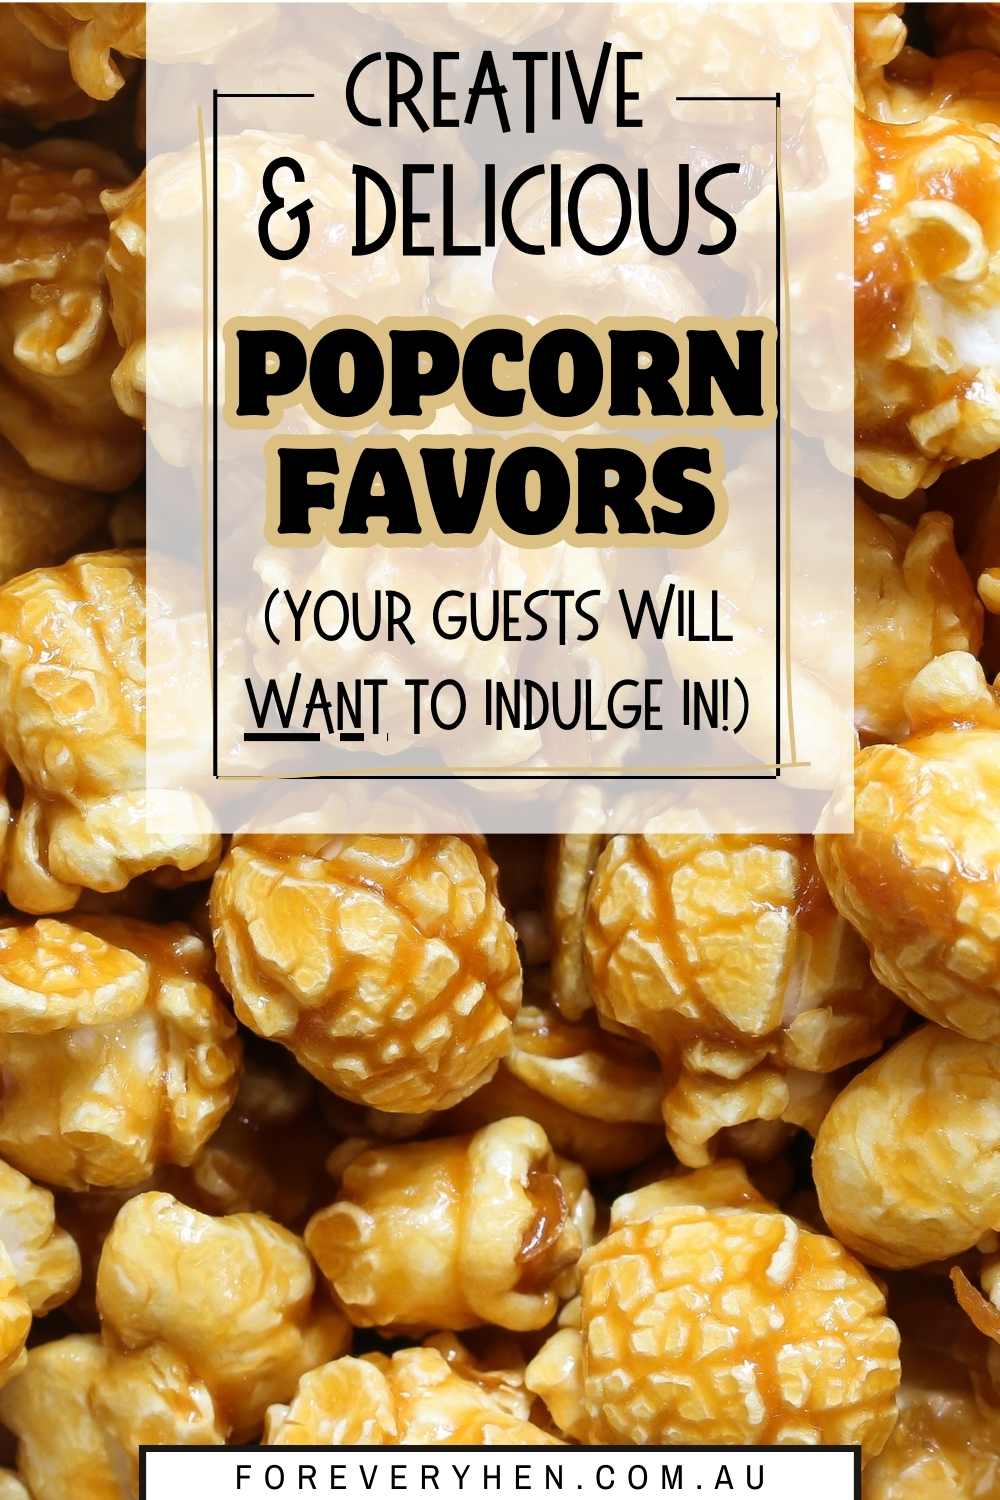 Image of popcorn in a mug, with a spoon drizzling honey on top of it. Text overlay: snack attack - popcorn favors that steal the show!